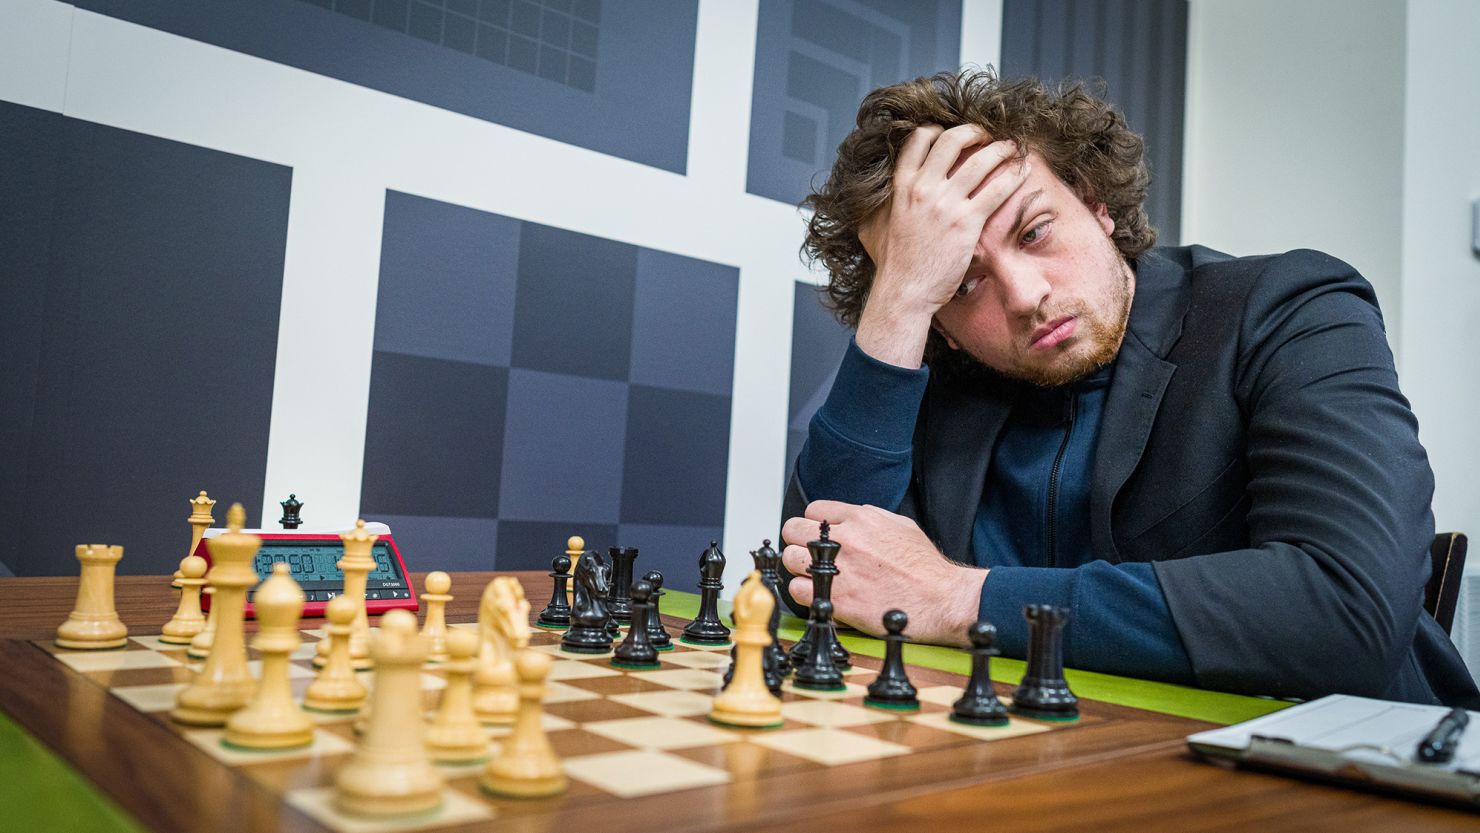 Hans Niemann, pictured playing in St. Louis, has been accused of cheating by five-time world champion Magnus Carlsen. Niemann denies the accusation.